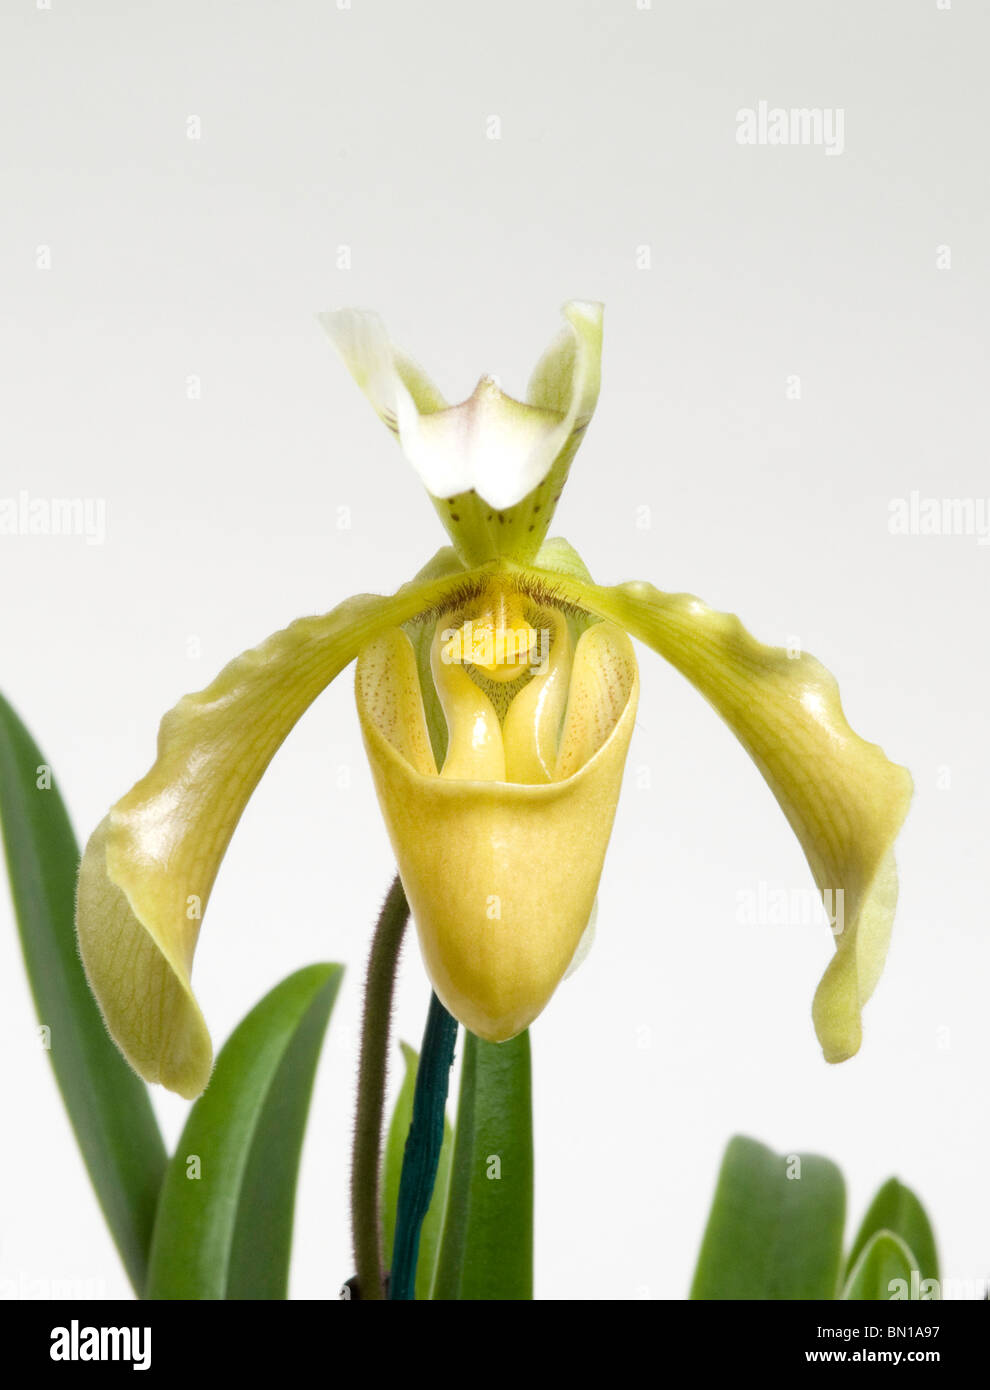 Single yellow flower of a slipper orchid (Paphiopedilum) Stock Photo